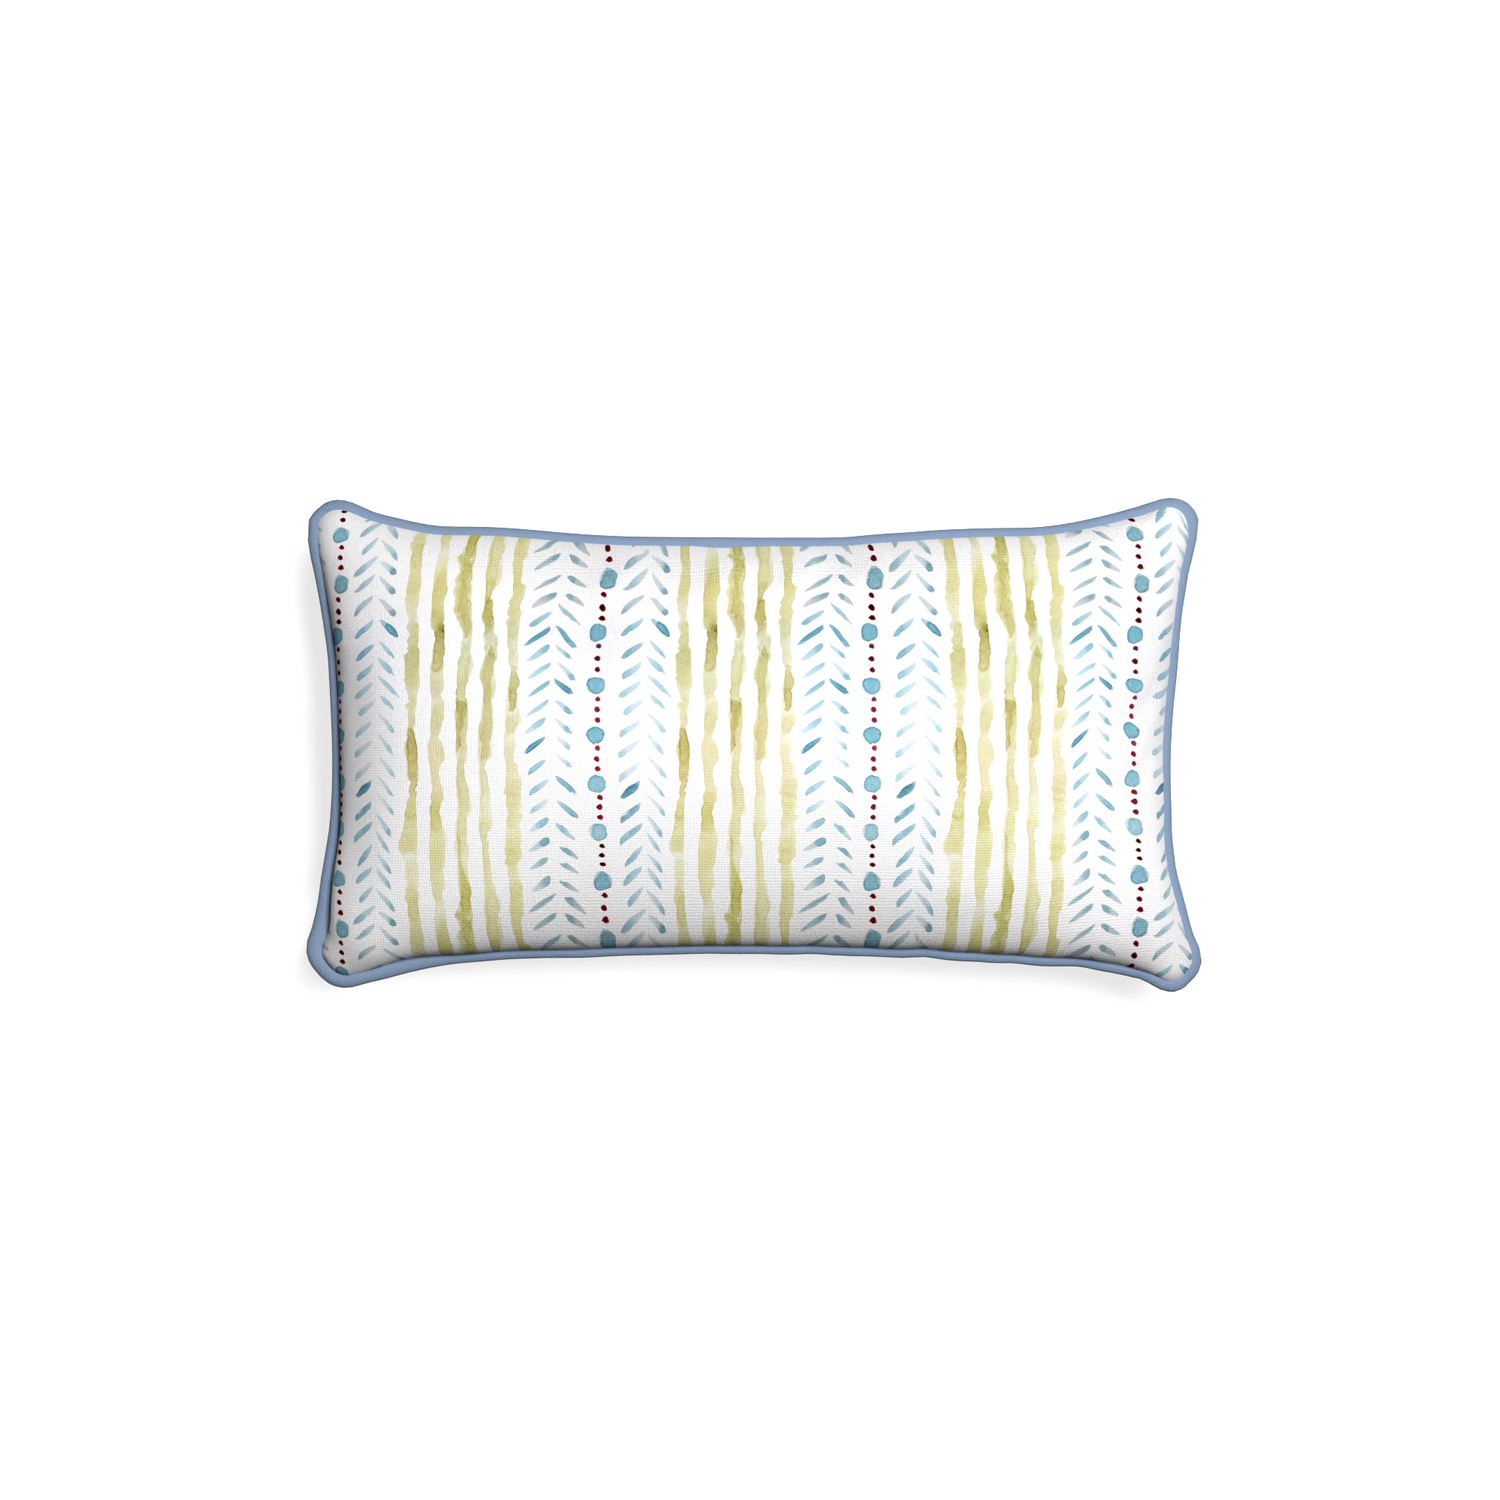 Petite-lumbar julia custom blue & green stripedpillow with sky piping on white background